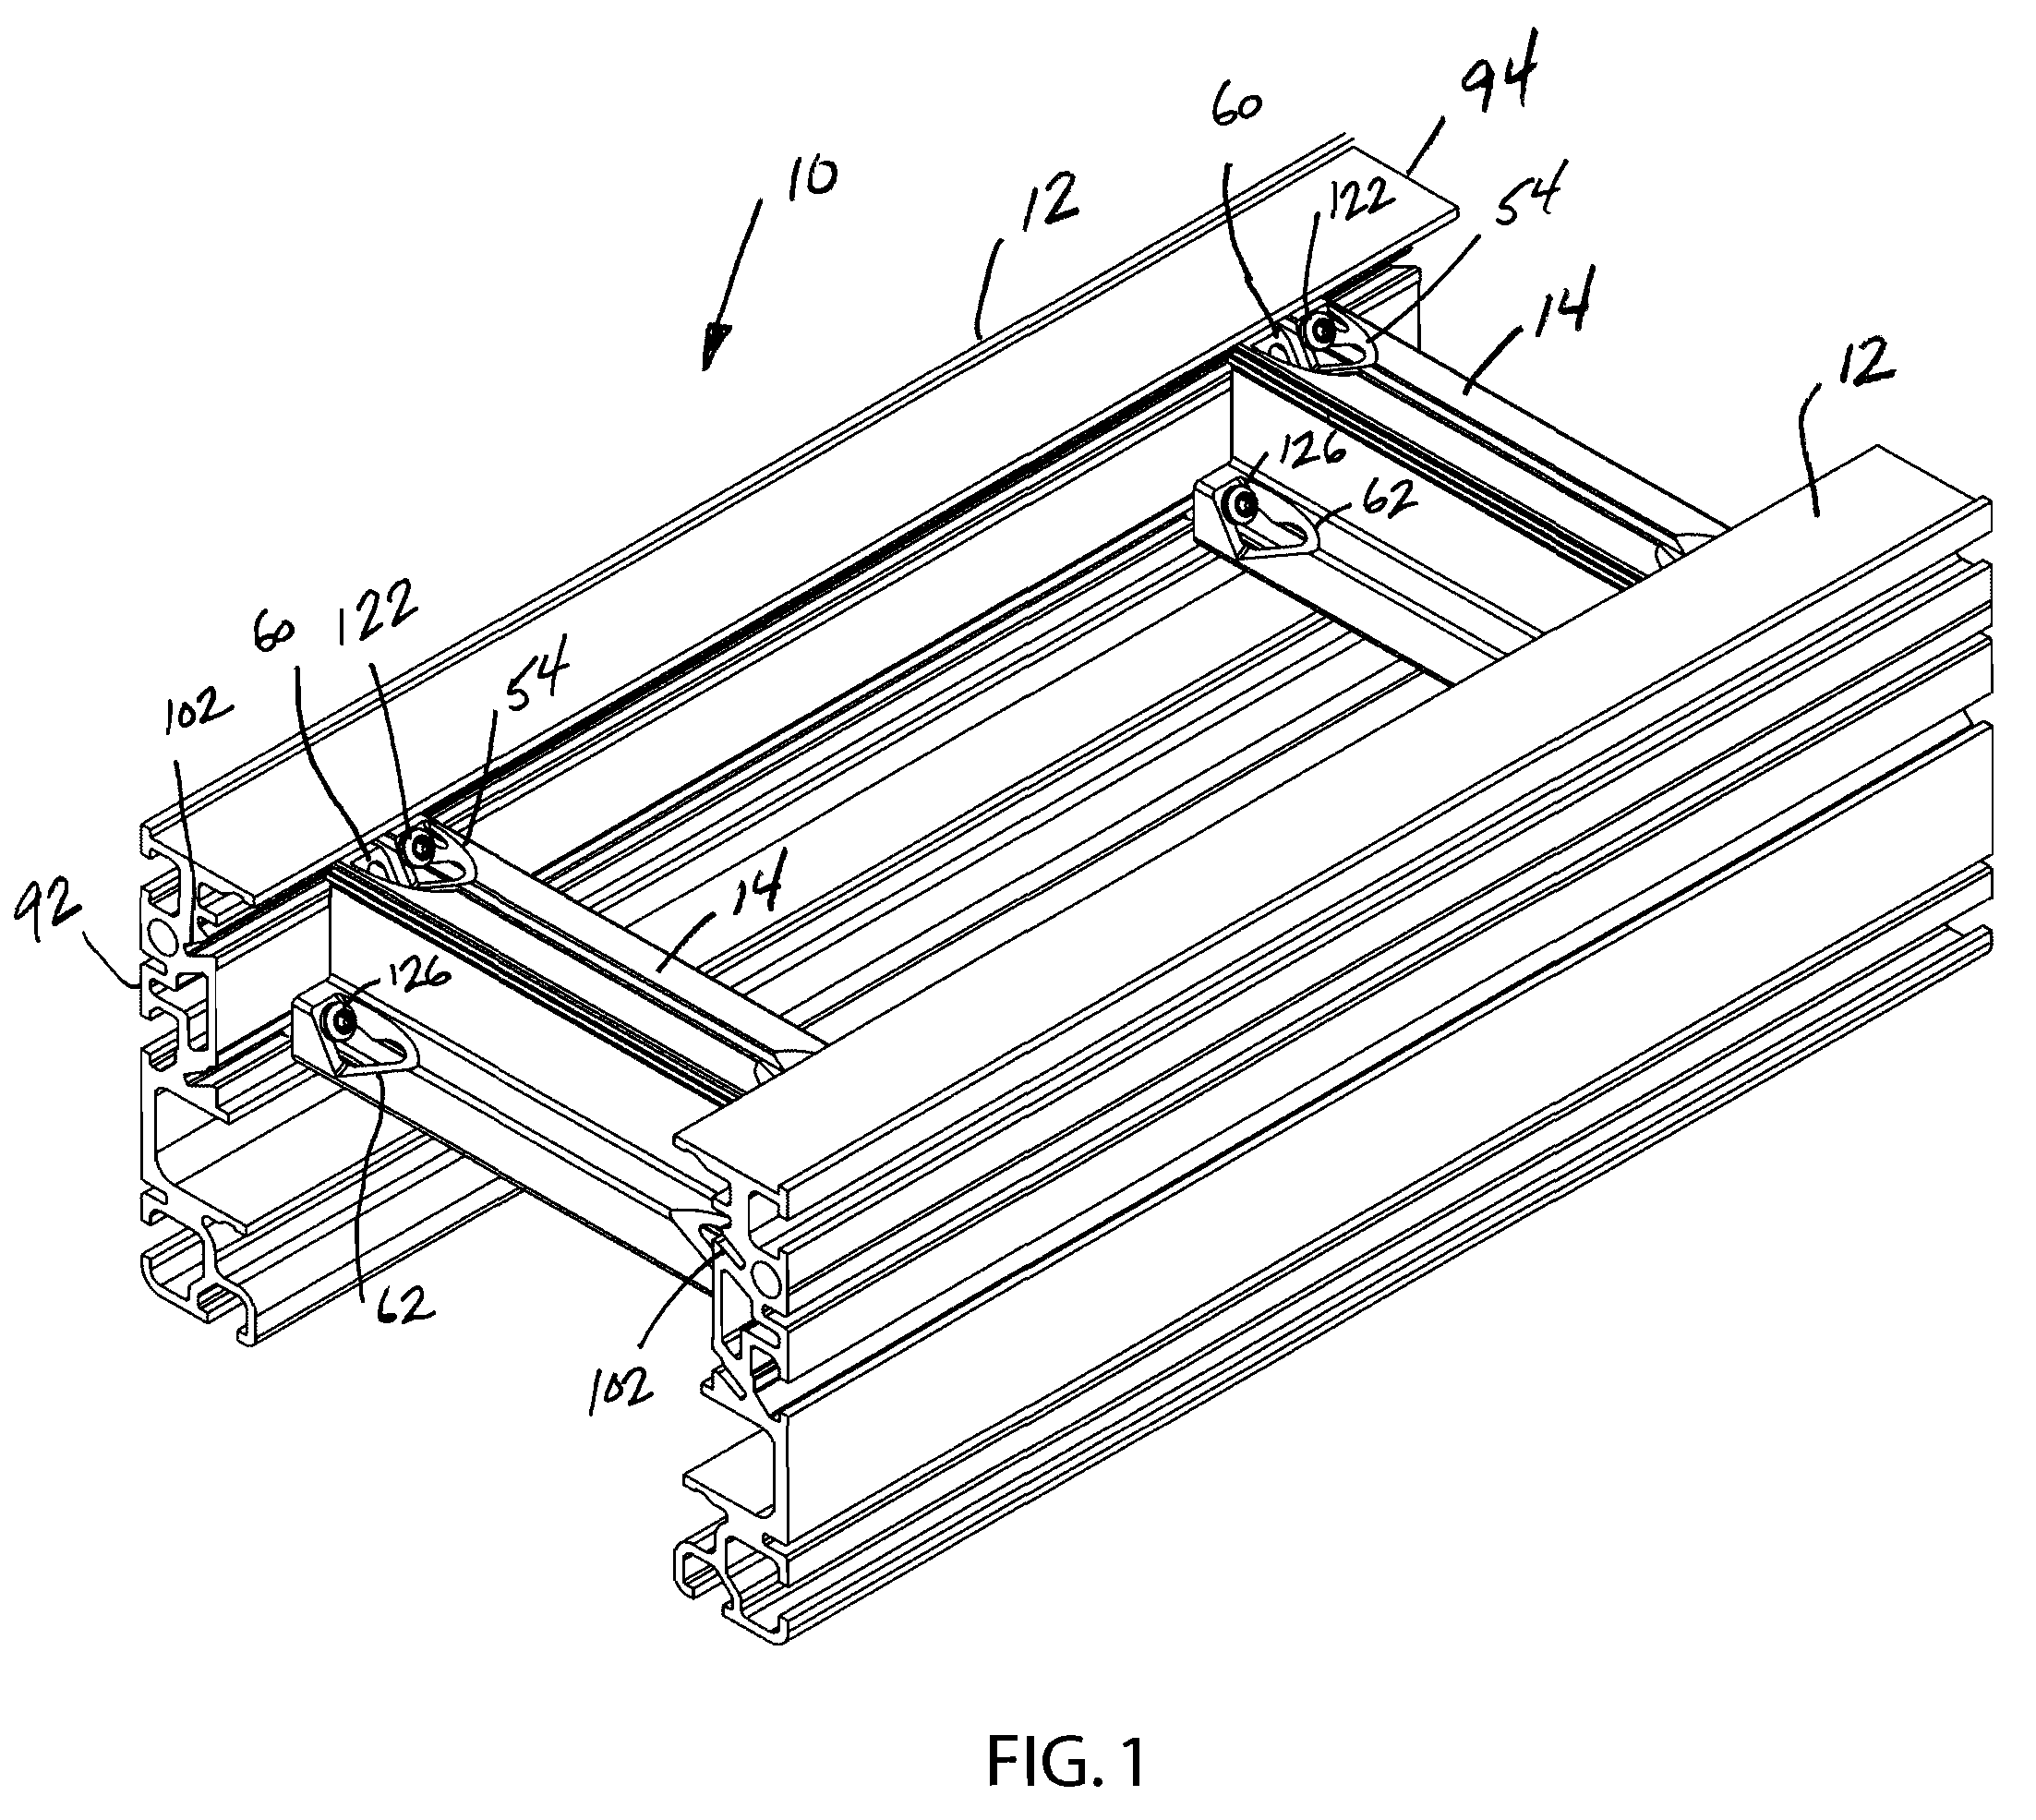 Conveyor frame assembly having side rails including multiple attachment slots and adjustable cross supports